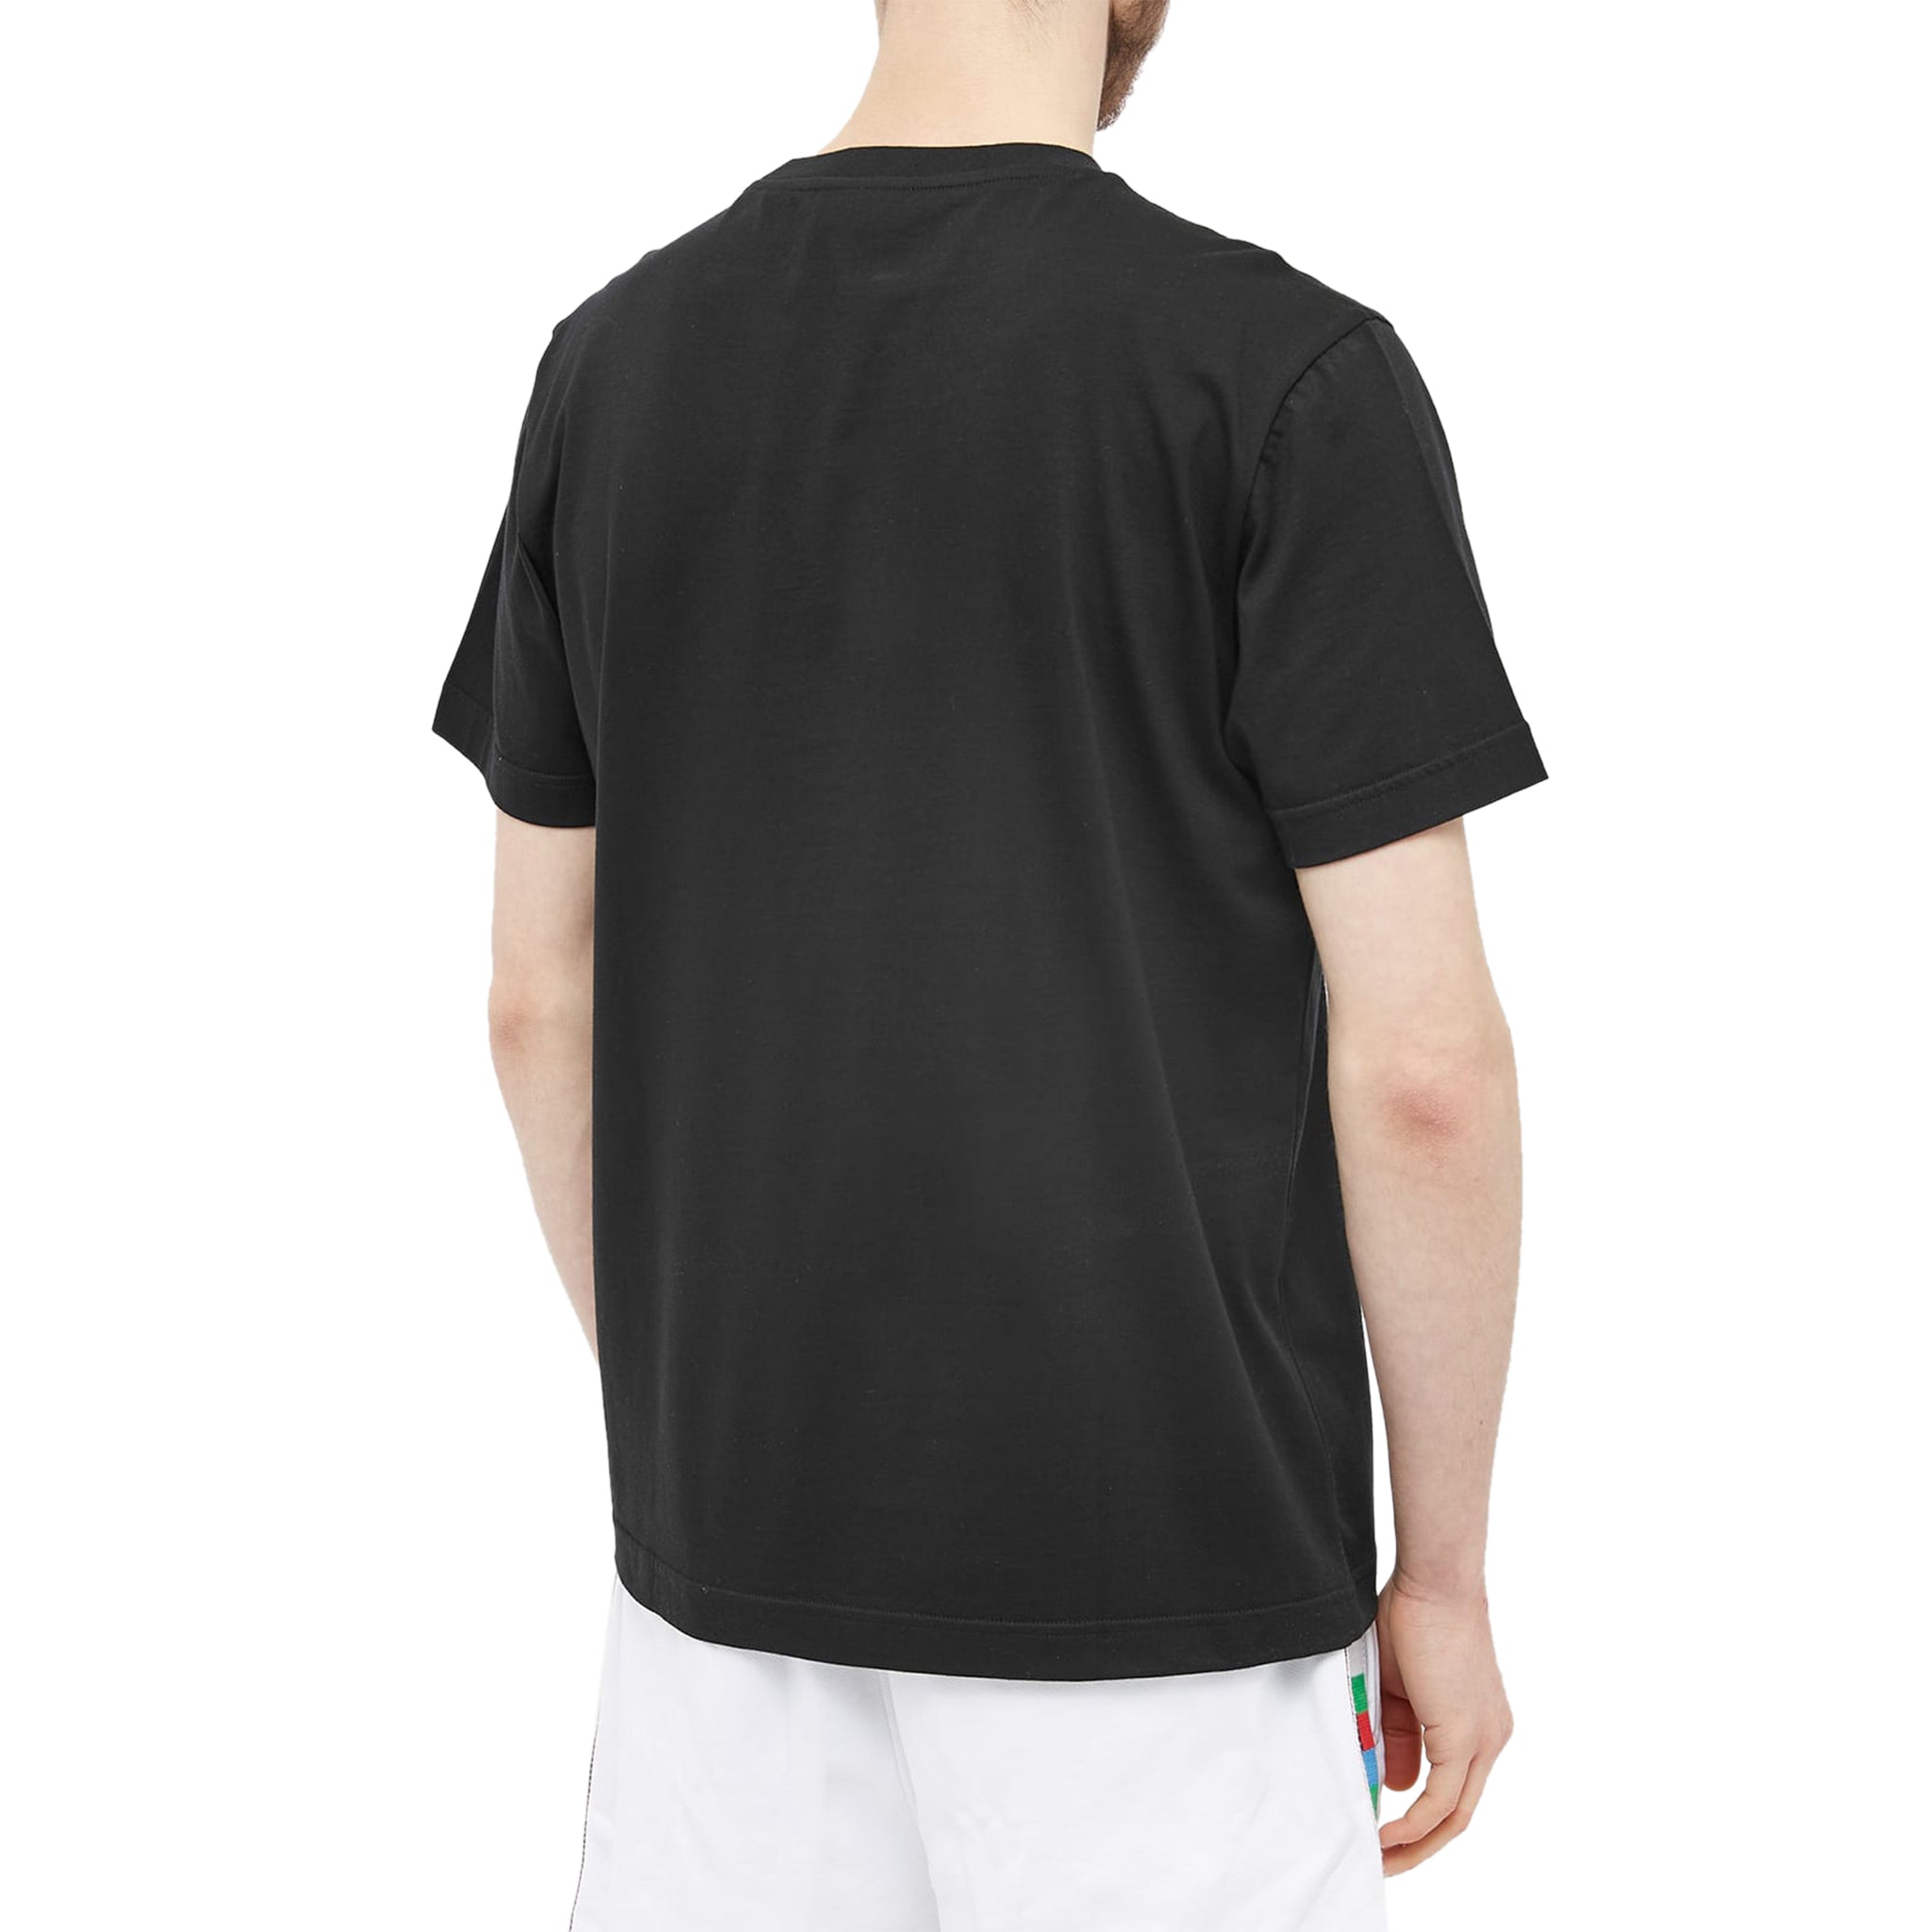 Back model view of Missoni Embroidered Logo Optic Black T Shirt UC22SL03BJ00C7S91AN